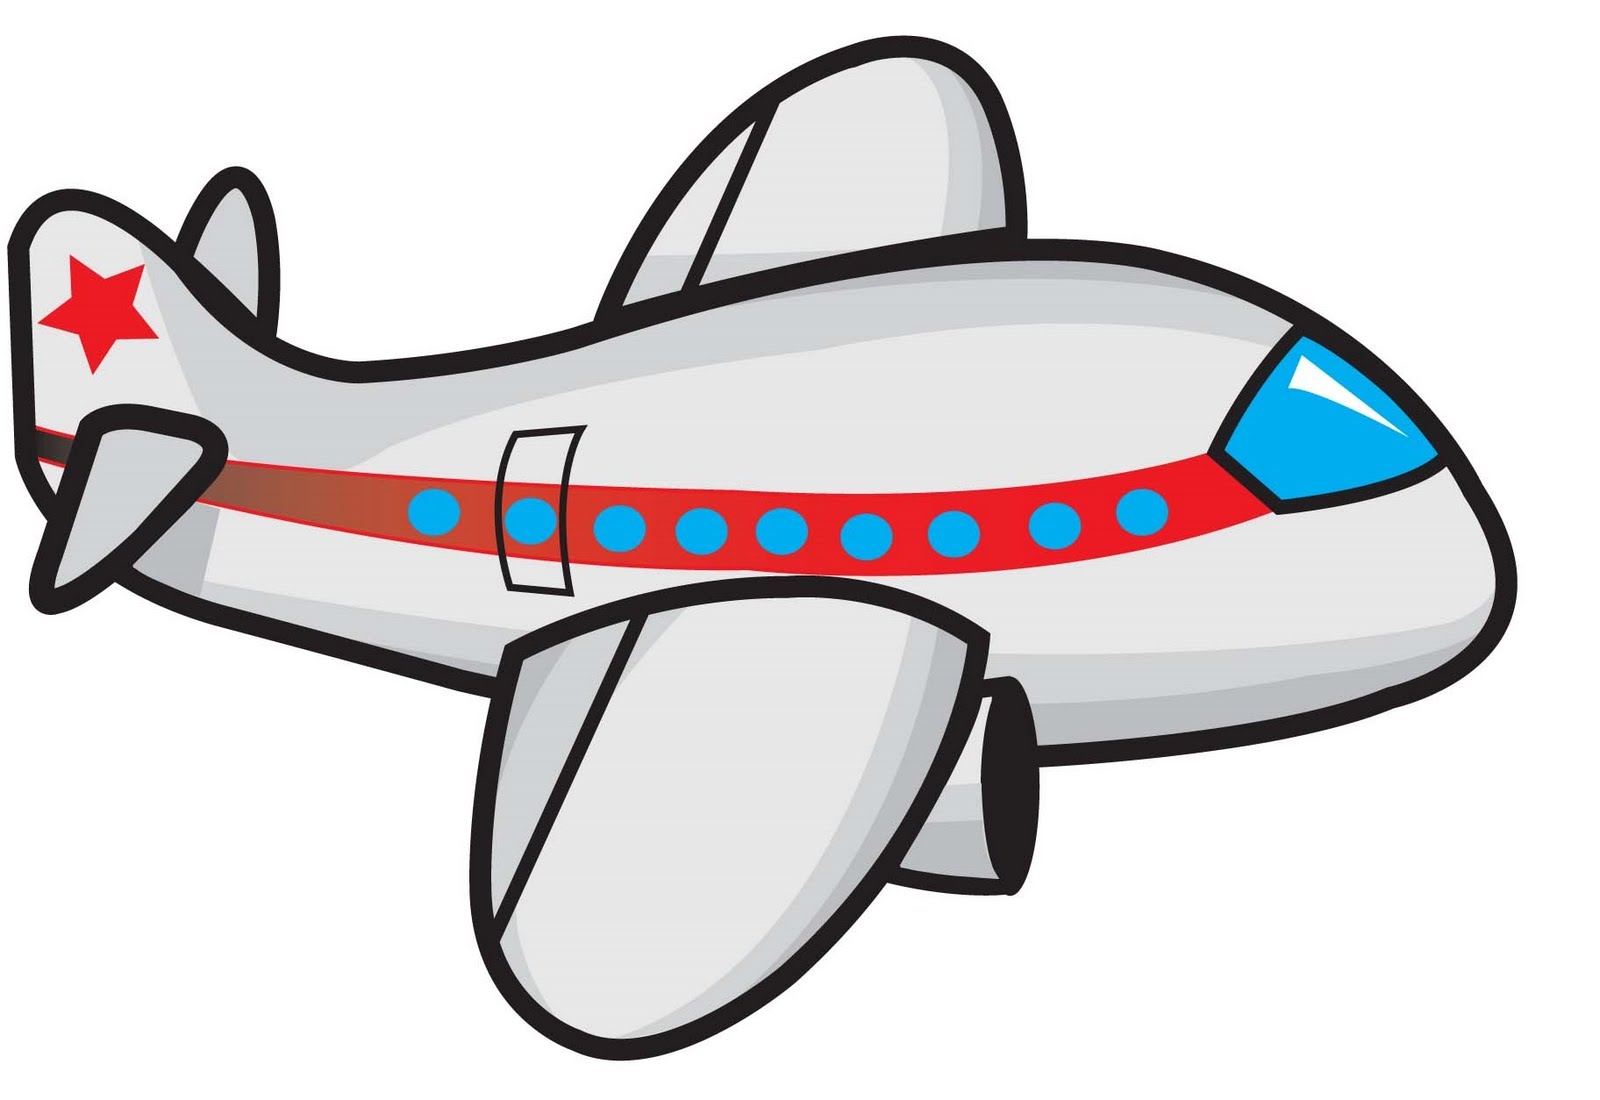 Free plane cliparts download. Airplane clipart animated